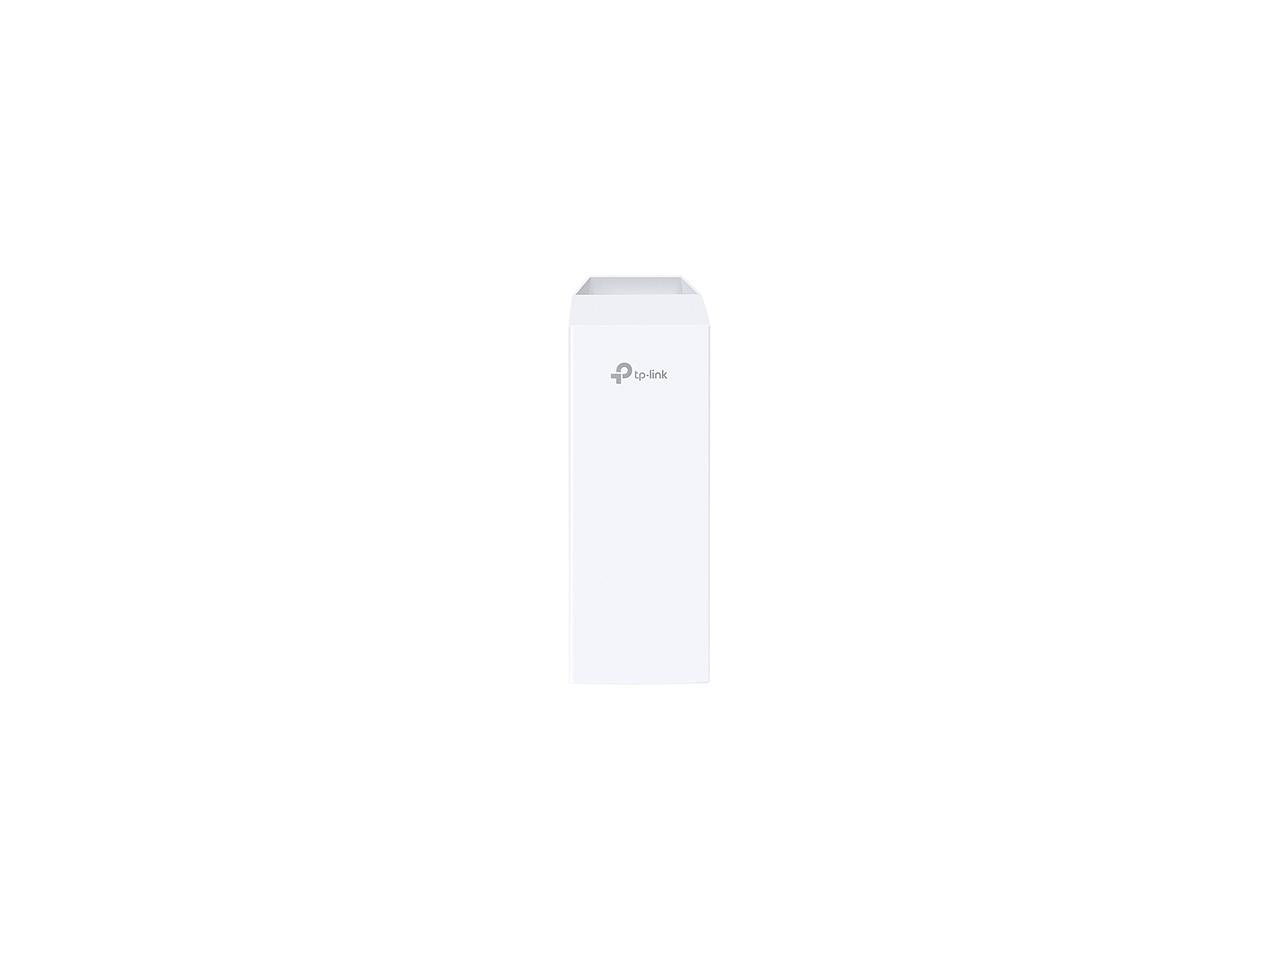 TP-LINK CPE510 5GHz 300Mbps 15KM+ Long Range High Power Outdoor CPE/Access Point, 802.11n/a,dual-polarized 13dBi directional antenna, Passive POE